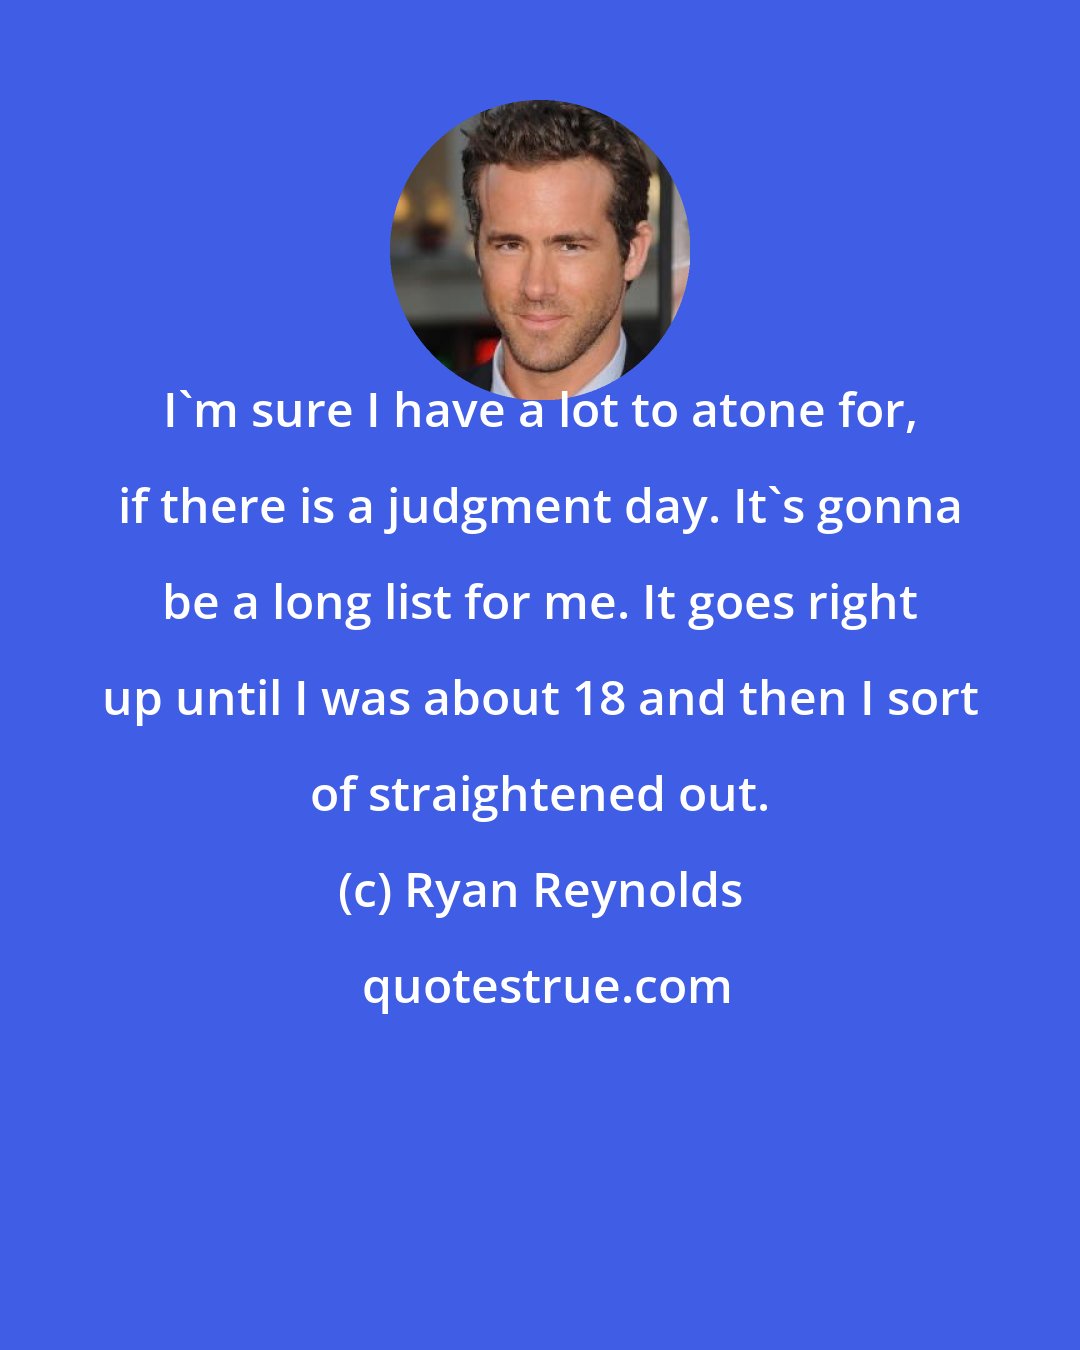 Ryan Reynolds: I'm sure I have a lot to atone for, if there is a judgment day. It's gonna be a long list for me. It goes right up until I was about 18 and then I sort of straightened out.